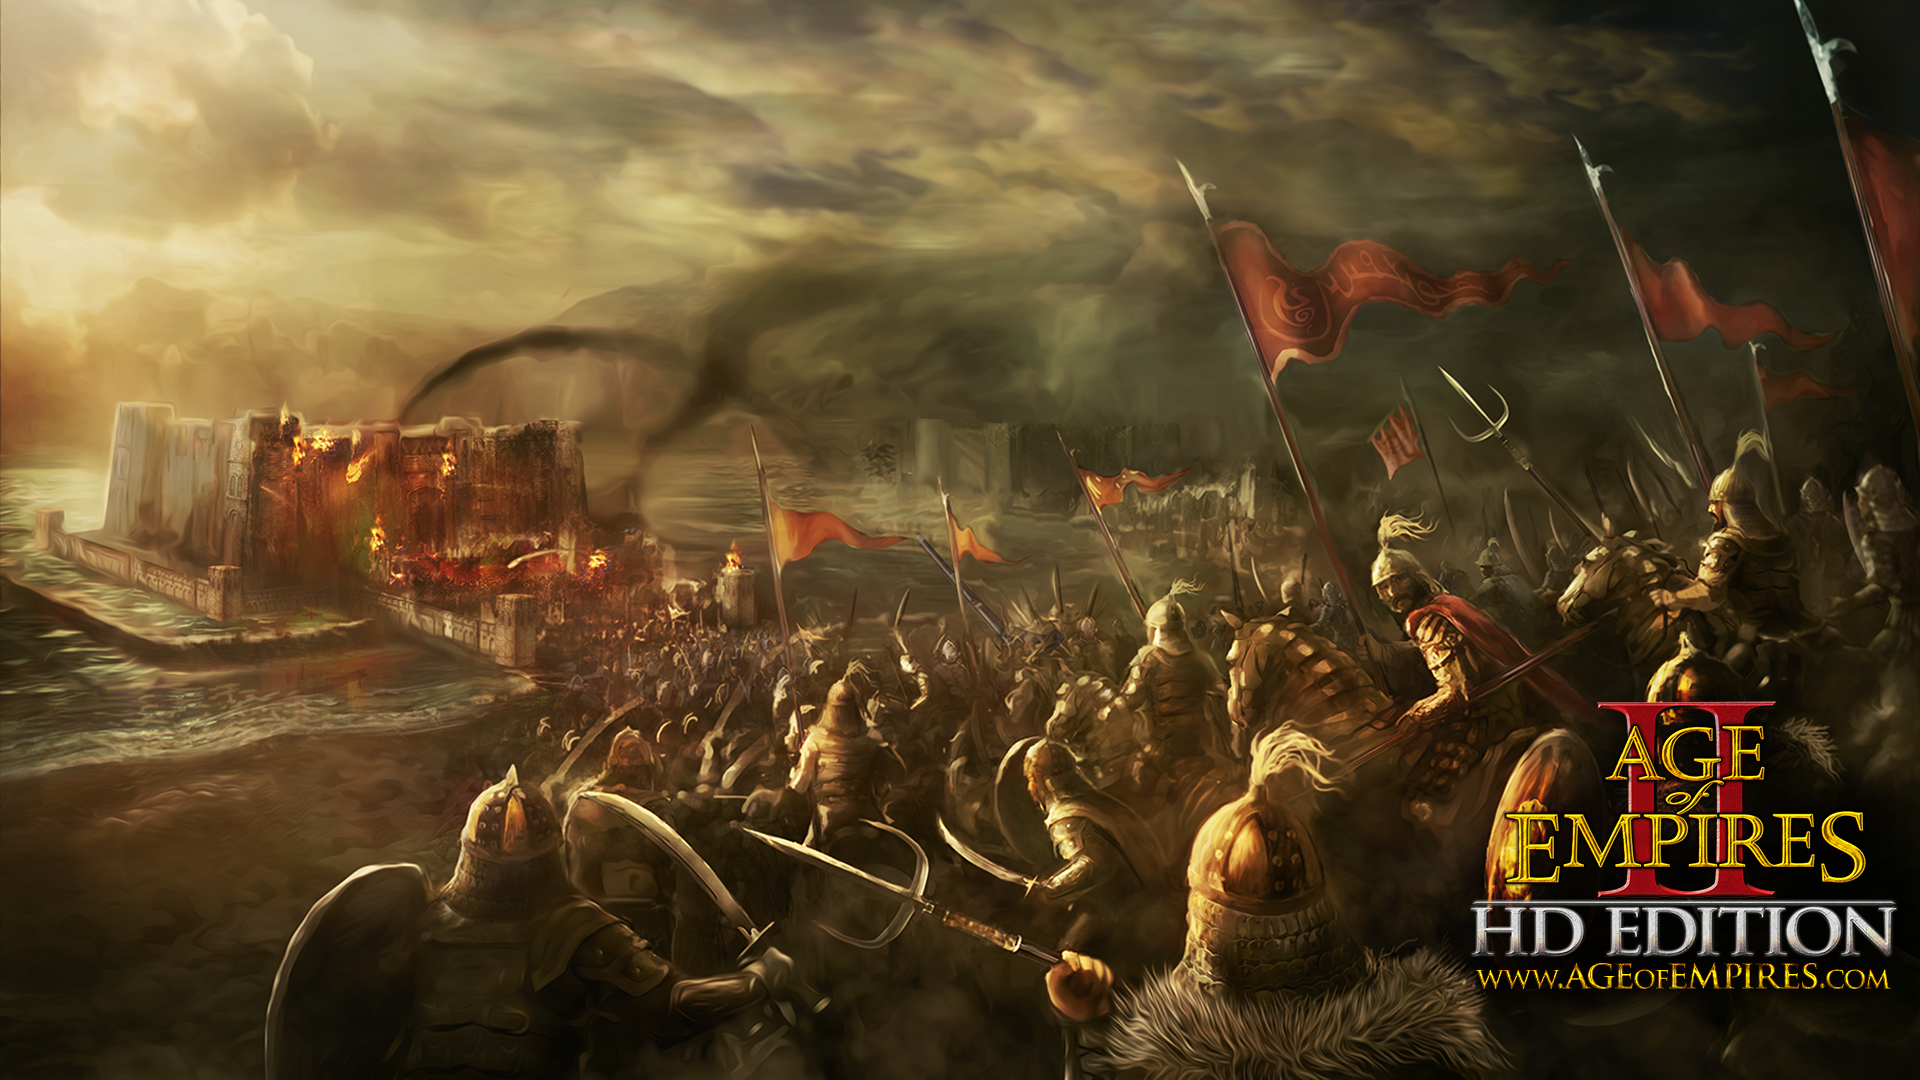 age of empires wallpaper,action adventure game,strategy video game,battle,pc game,mythology